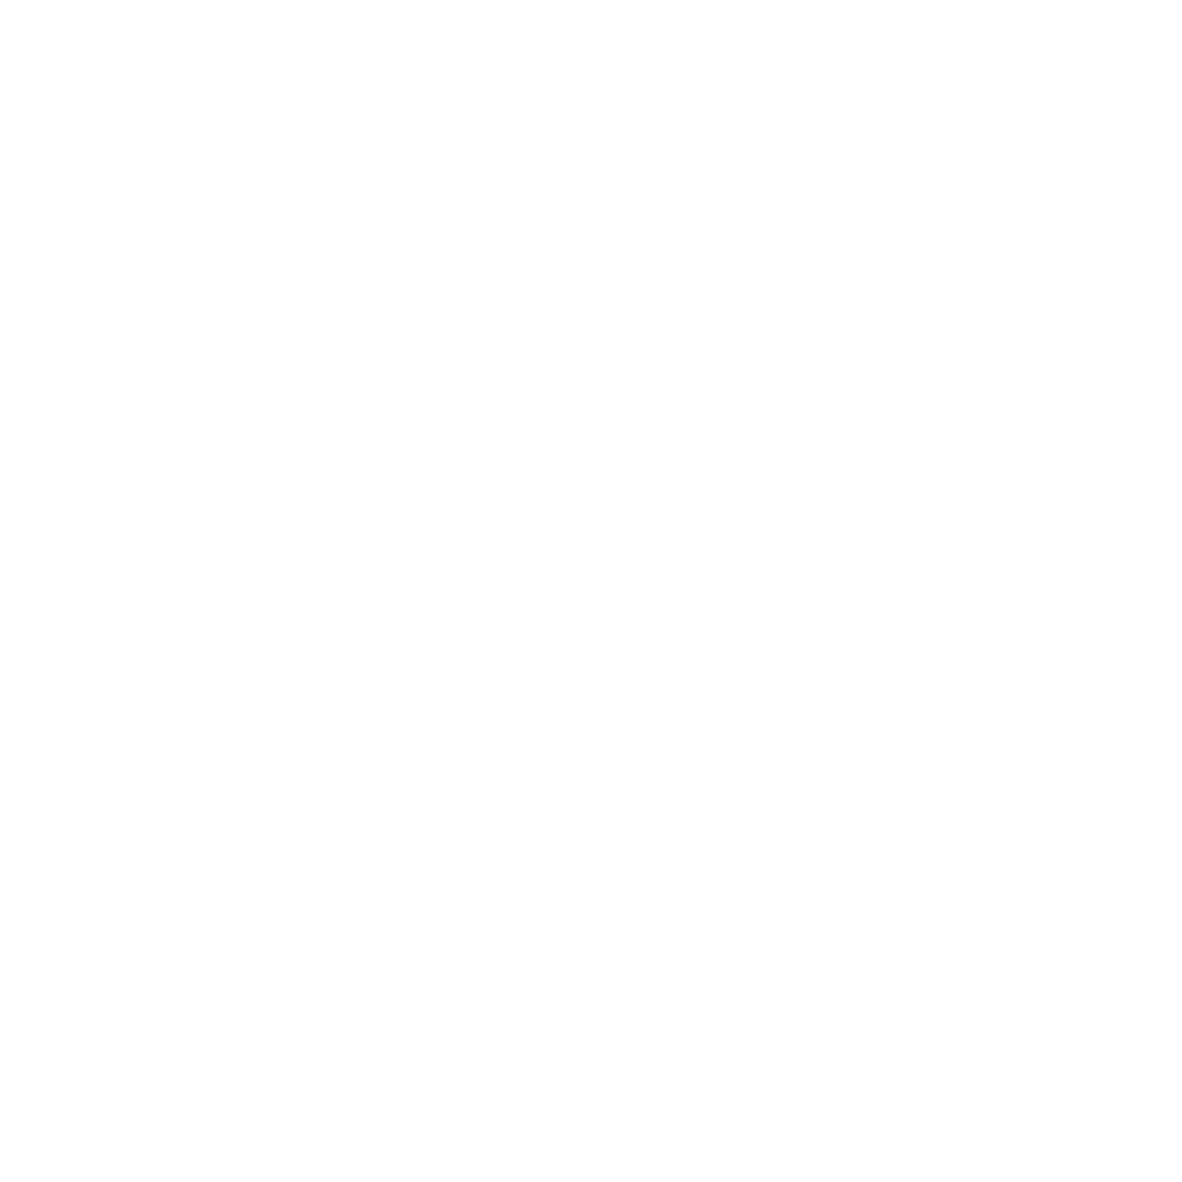 2 AA rosette award for culinary excellence logo white